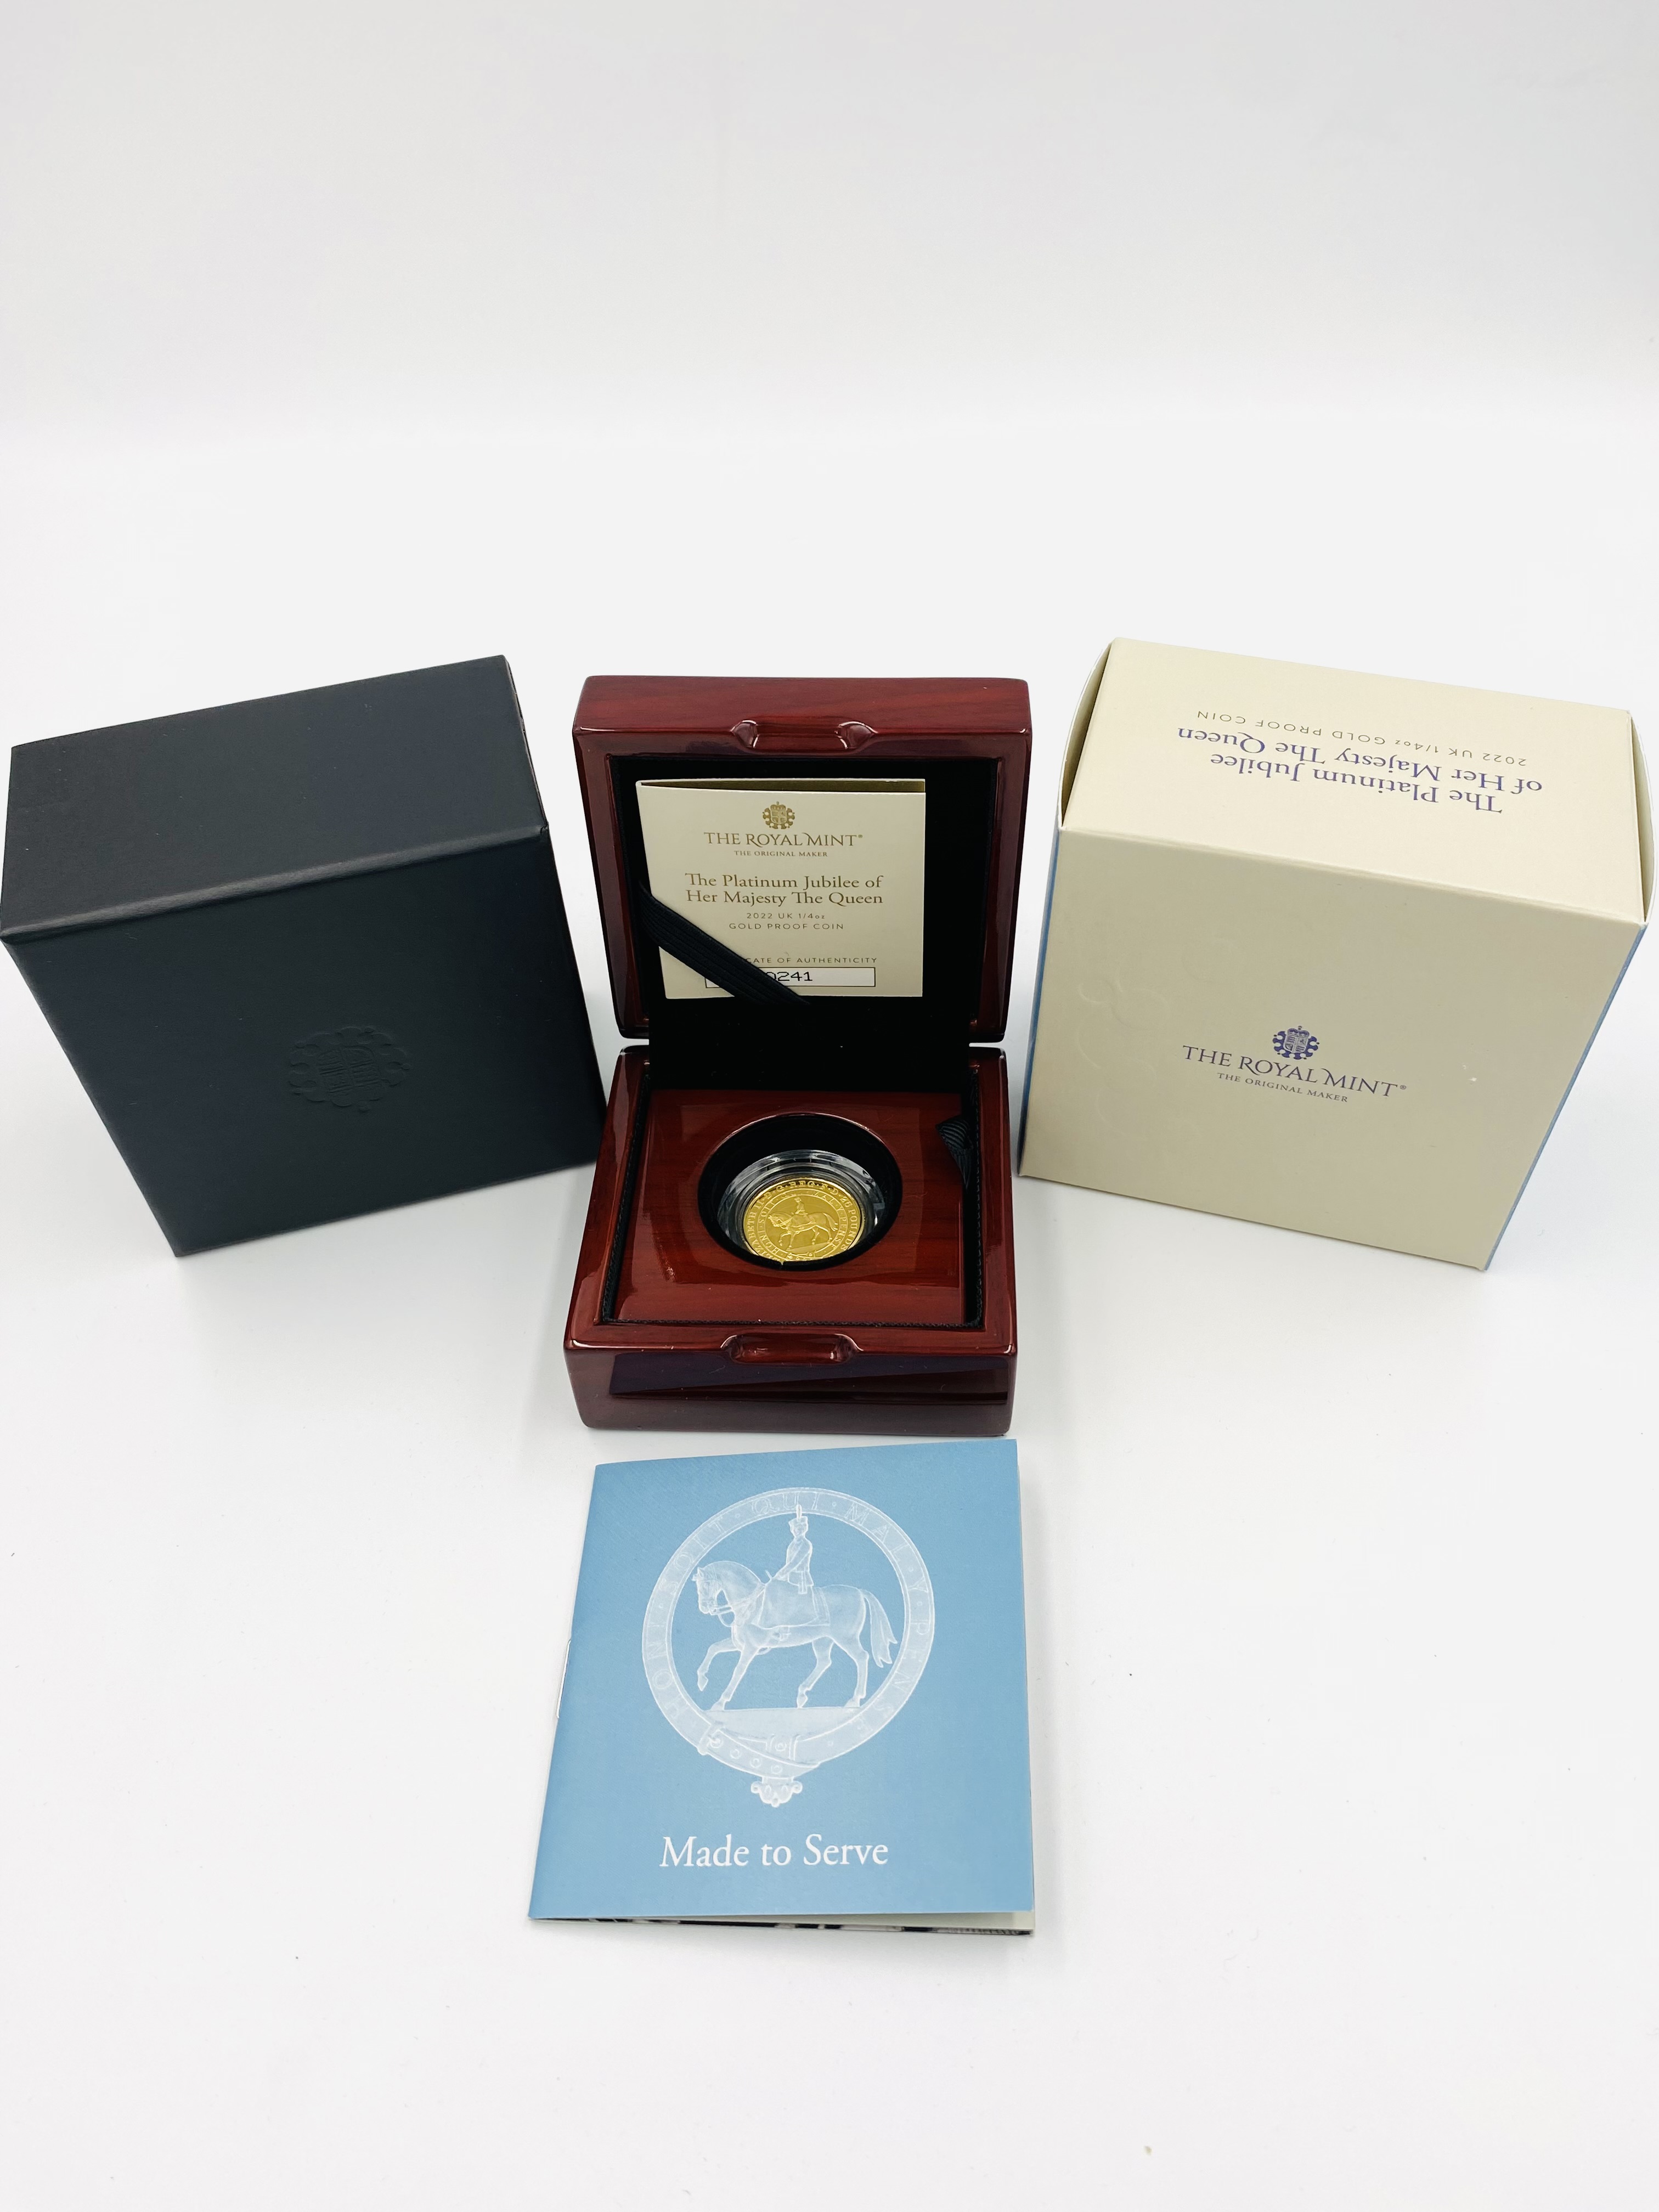 Royal Mint Platinum Jubilee of Her Majesty the Queen, 2022 limited edition gold proof coin